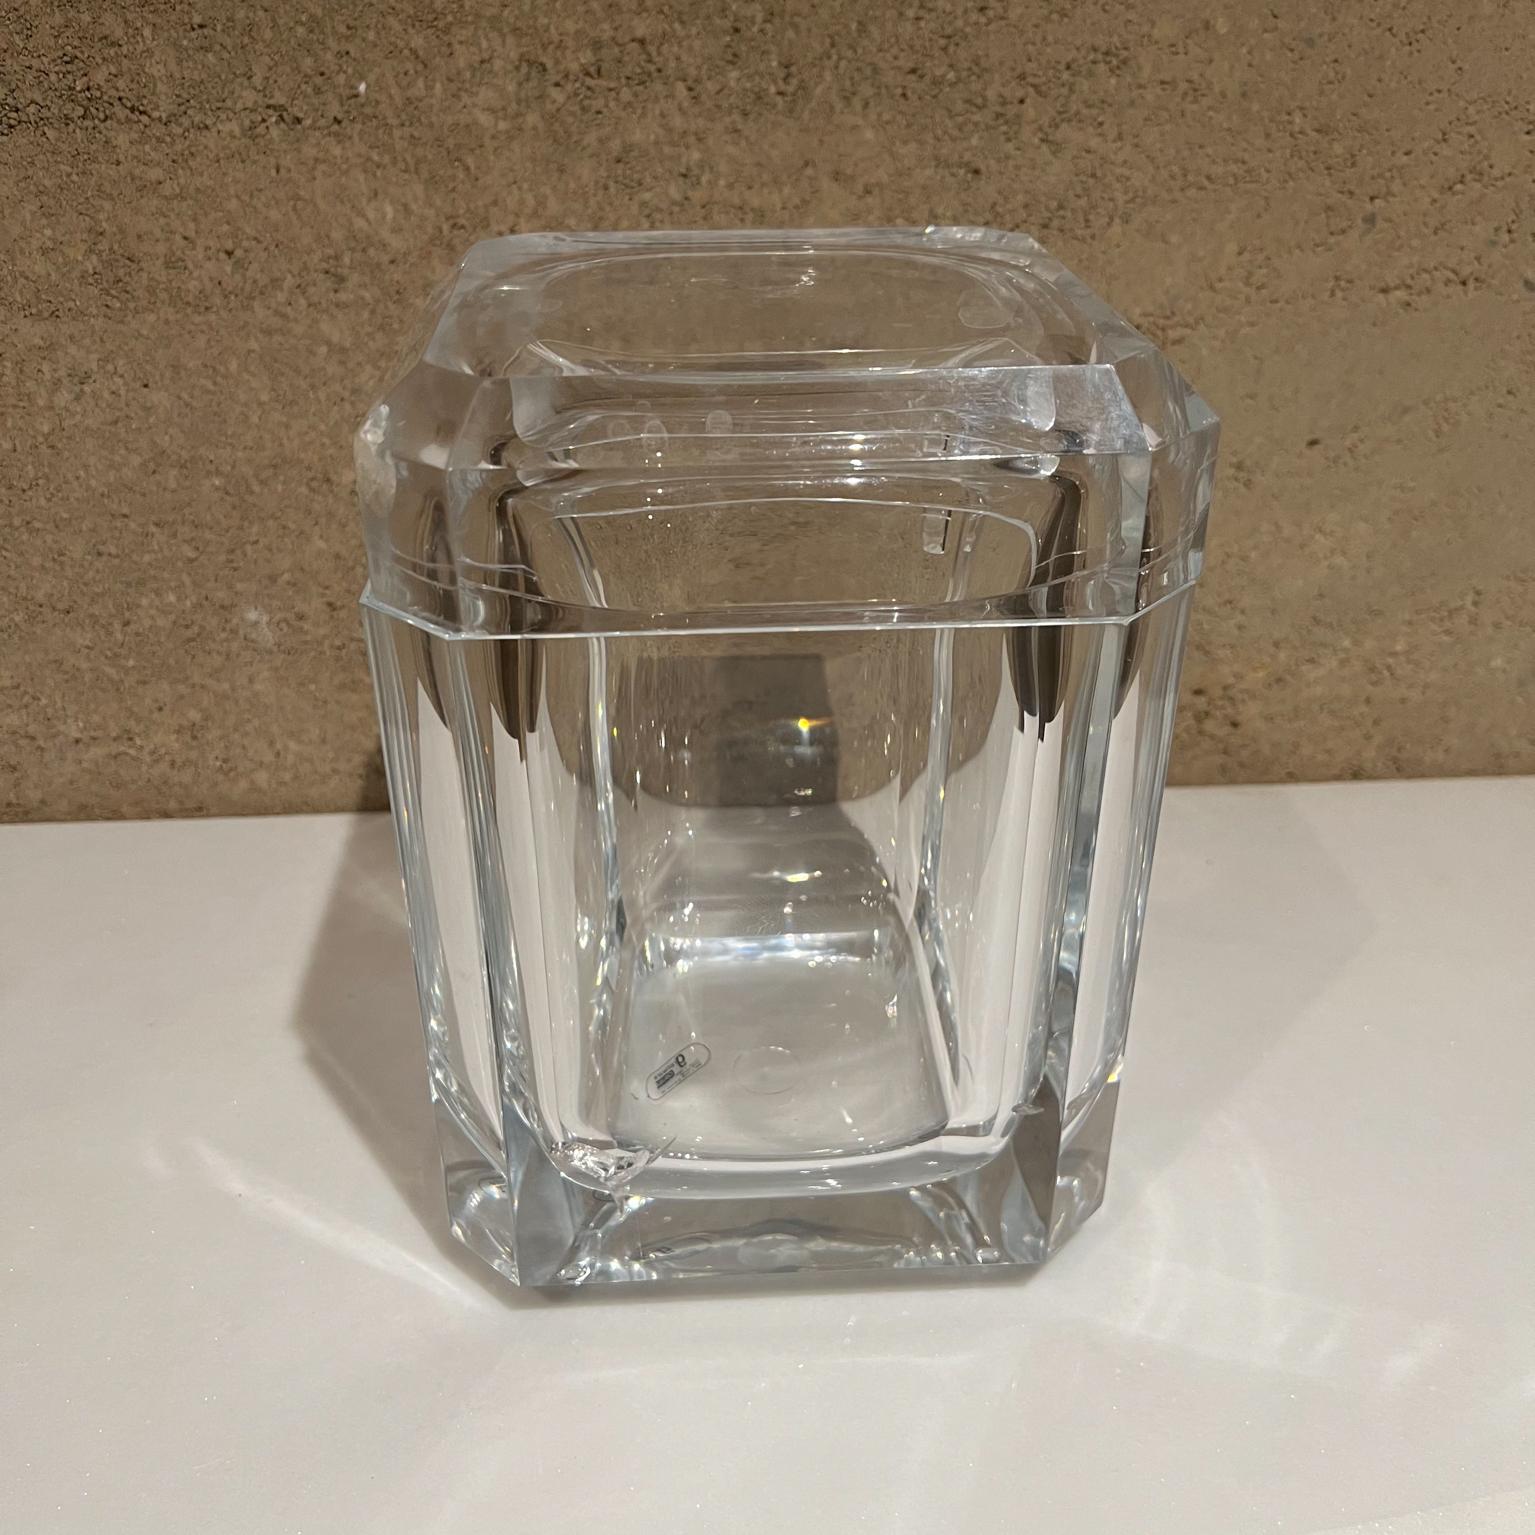 Ice Bucket
Lucite ice bucket in the style of Alessandro Albrizzi Italy
Stamped with maker's logo; Grainware Carlisle
Measures: 9 tall x 7.75 w x 7.75
Vintage condition pre-owned. It has a hairline crack on the inside of bucket and one repair on